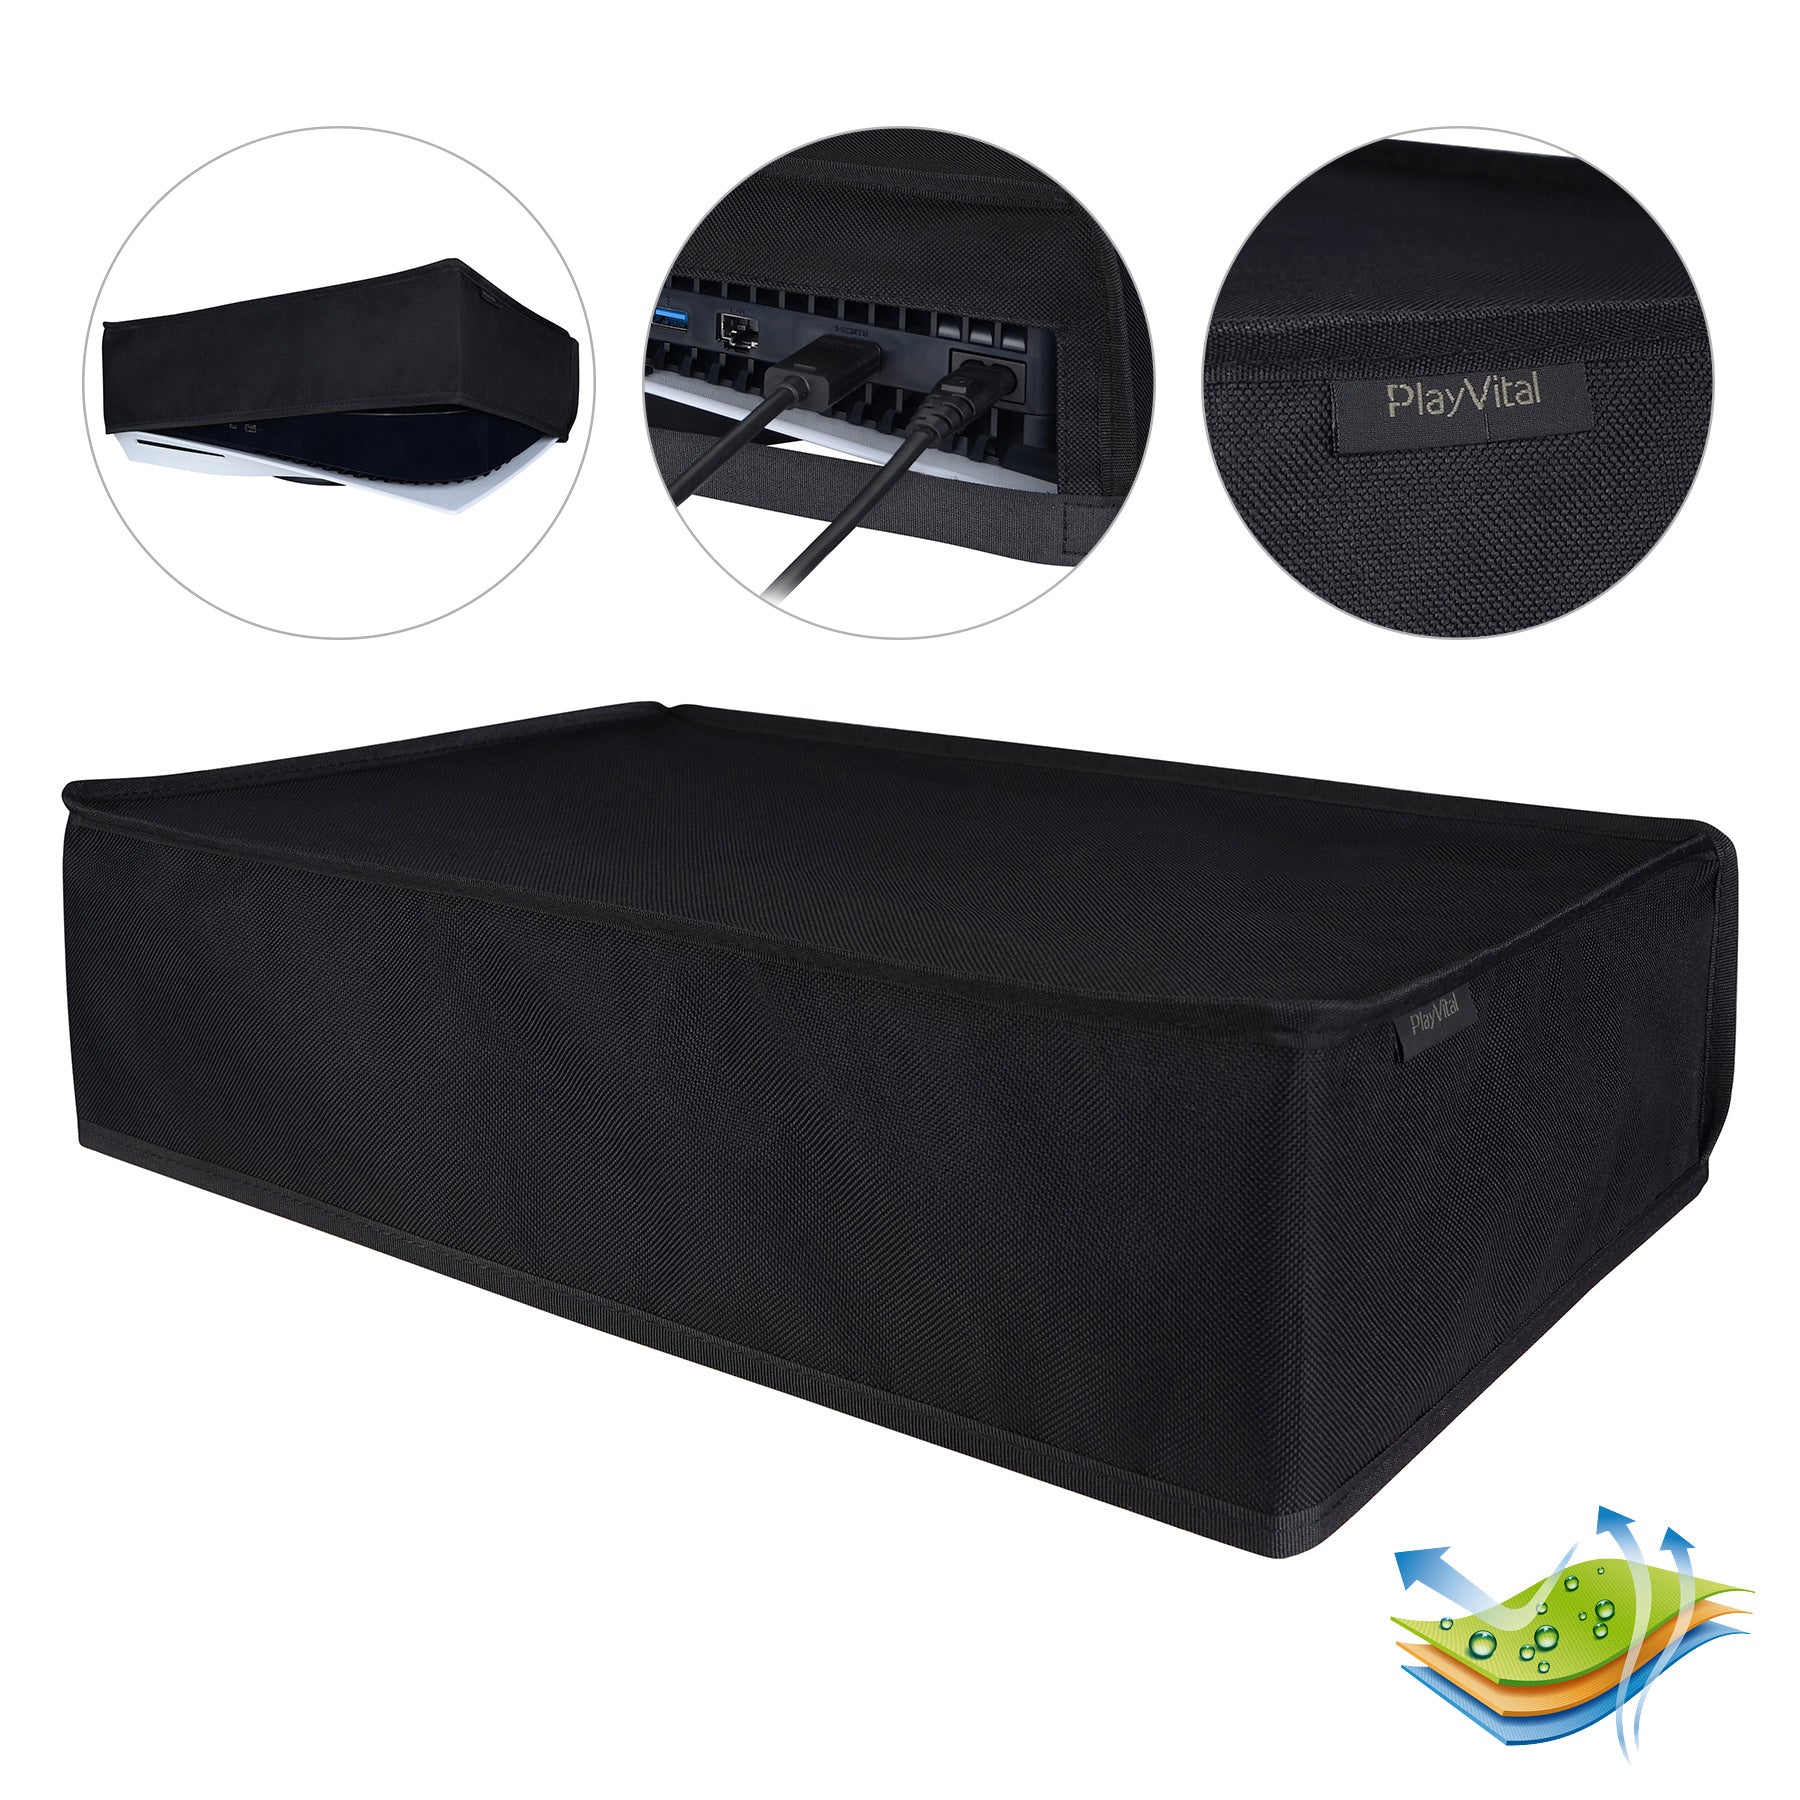 PlayVital Black Nylon Horizontal PS5 Dust Cover, Soft Neat Lining Dust Guard for PS5 Console, Anti Scratch Waterproof Cover Sleeve for PS5 Console Digital Edition & Regular Edition - PFPJ009 PlayVital